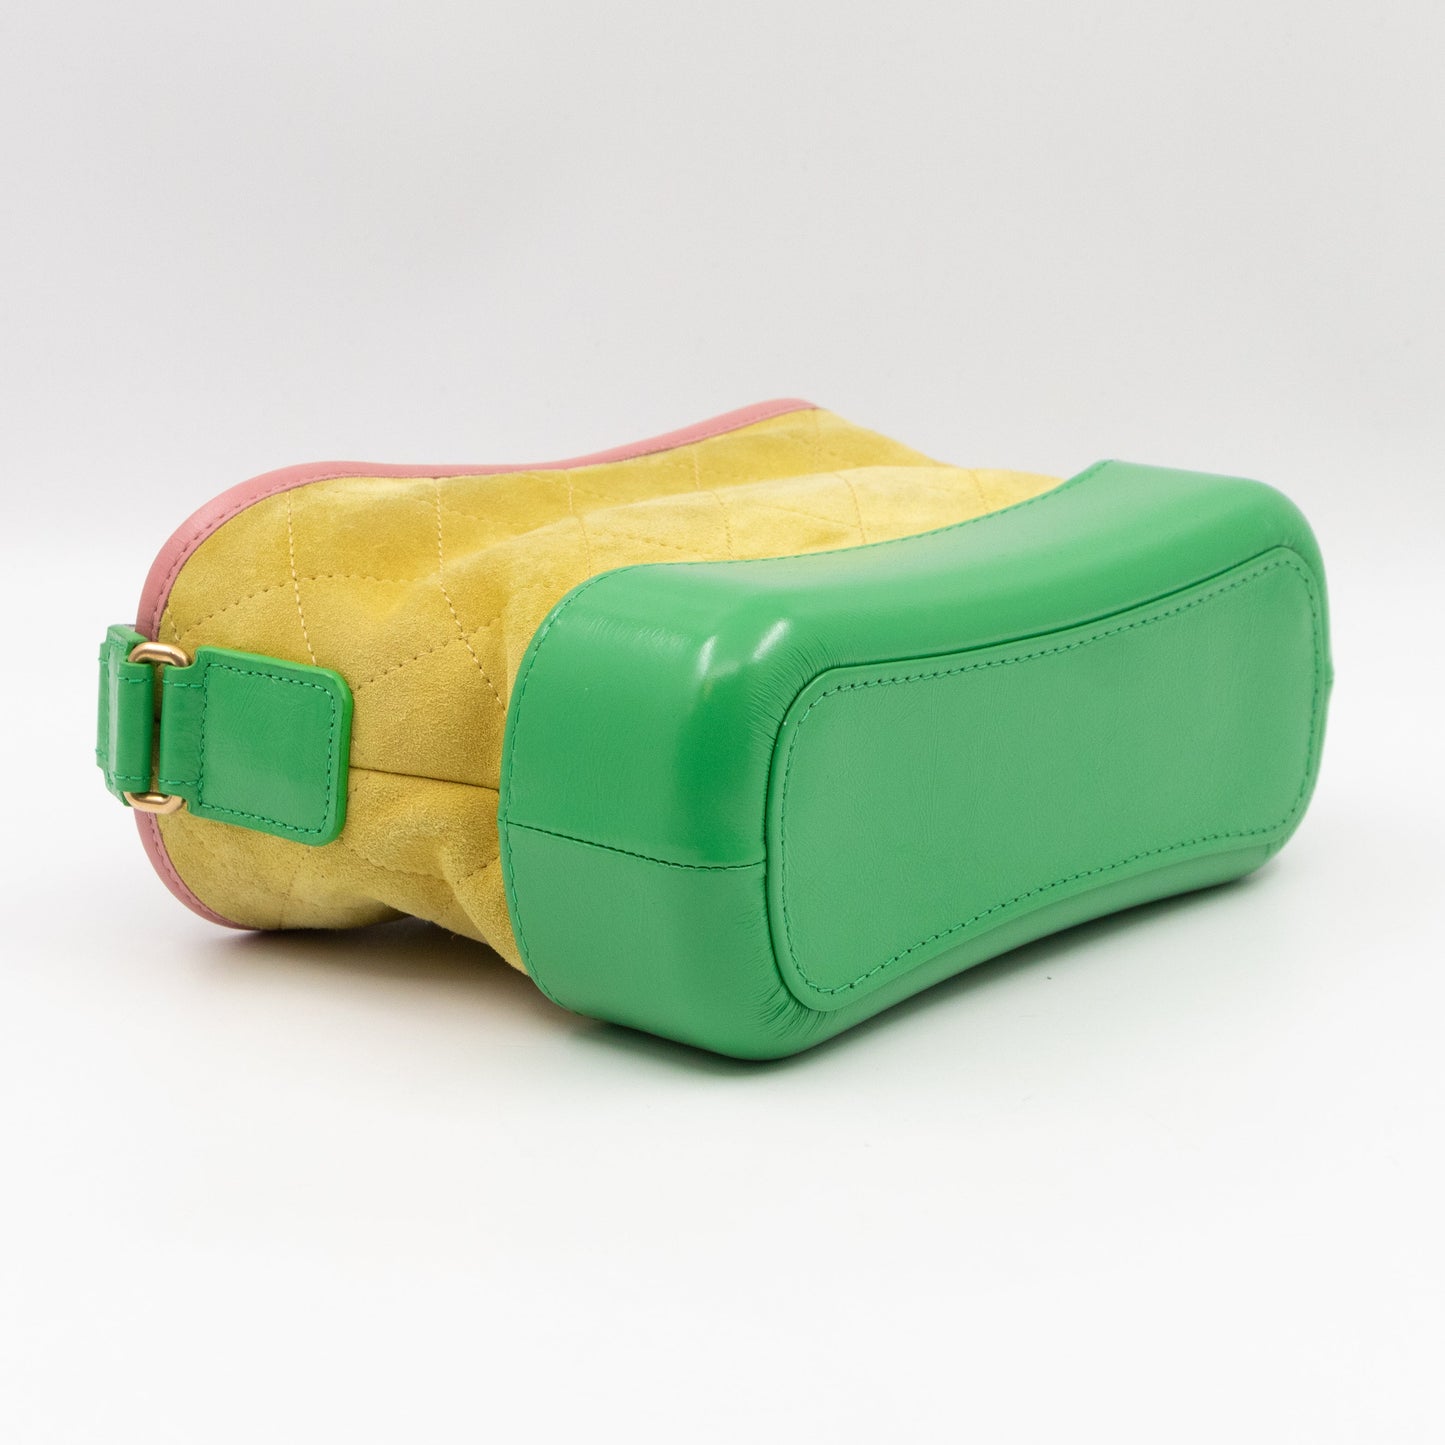 Gabrielle Hobo Small Yellow Suede Green Pink Leather